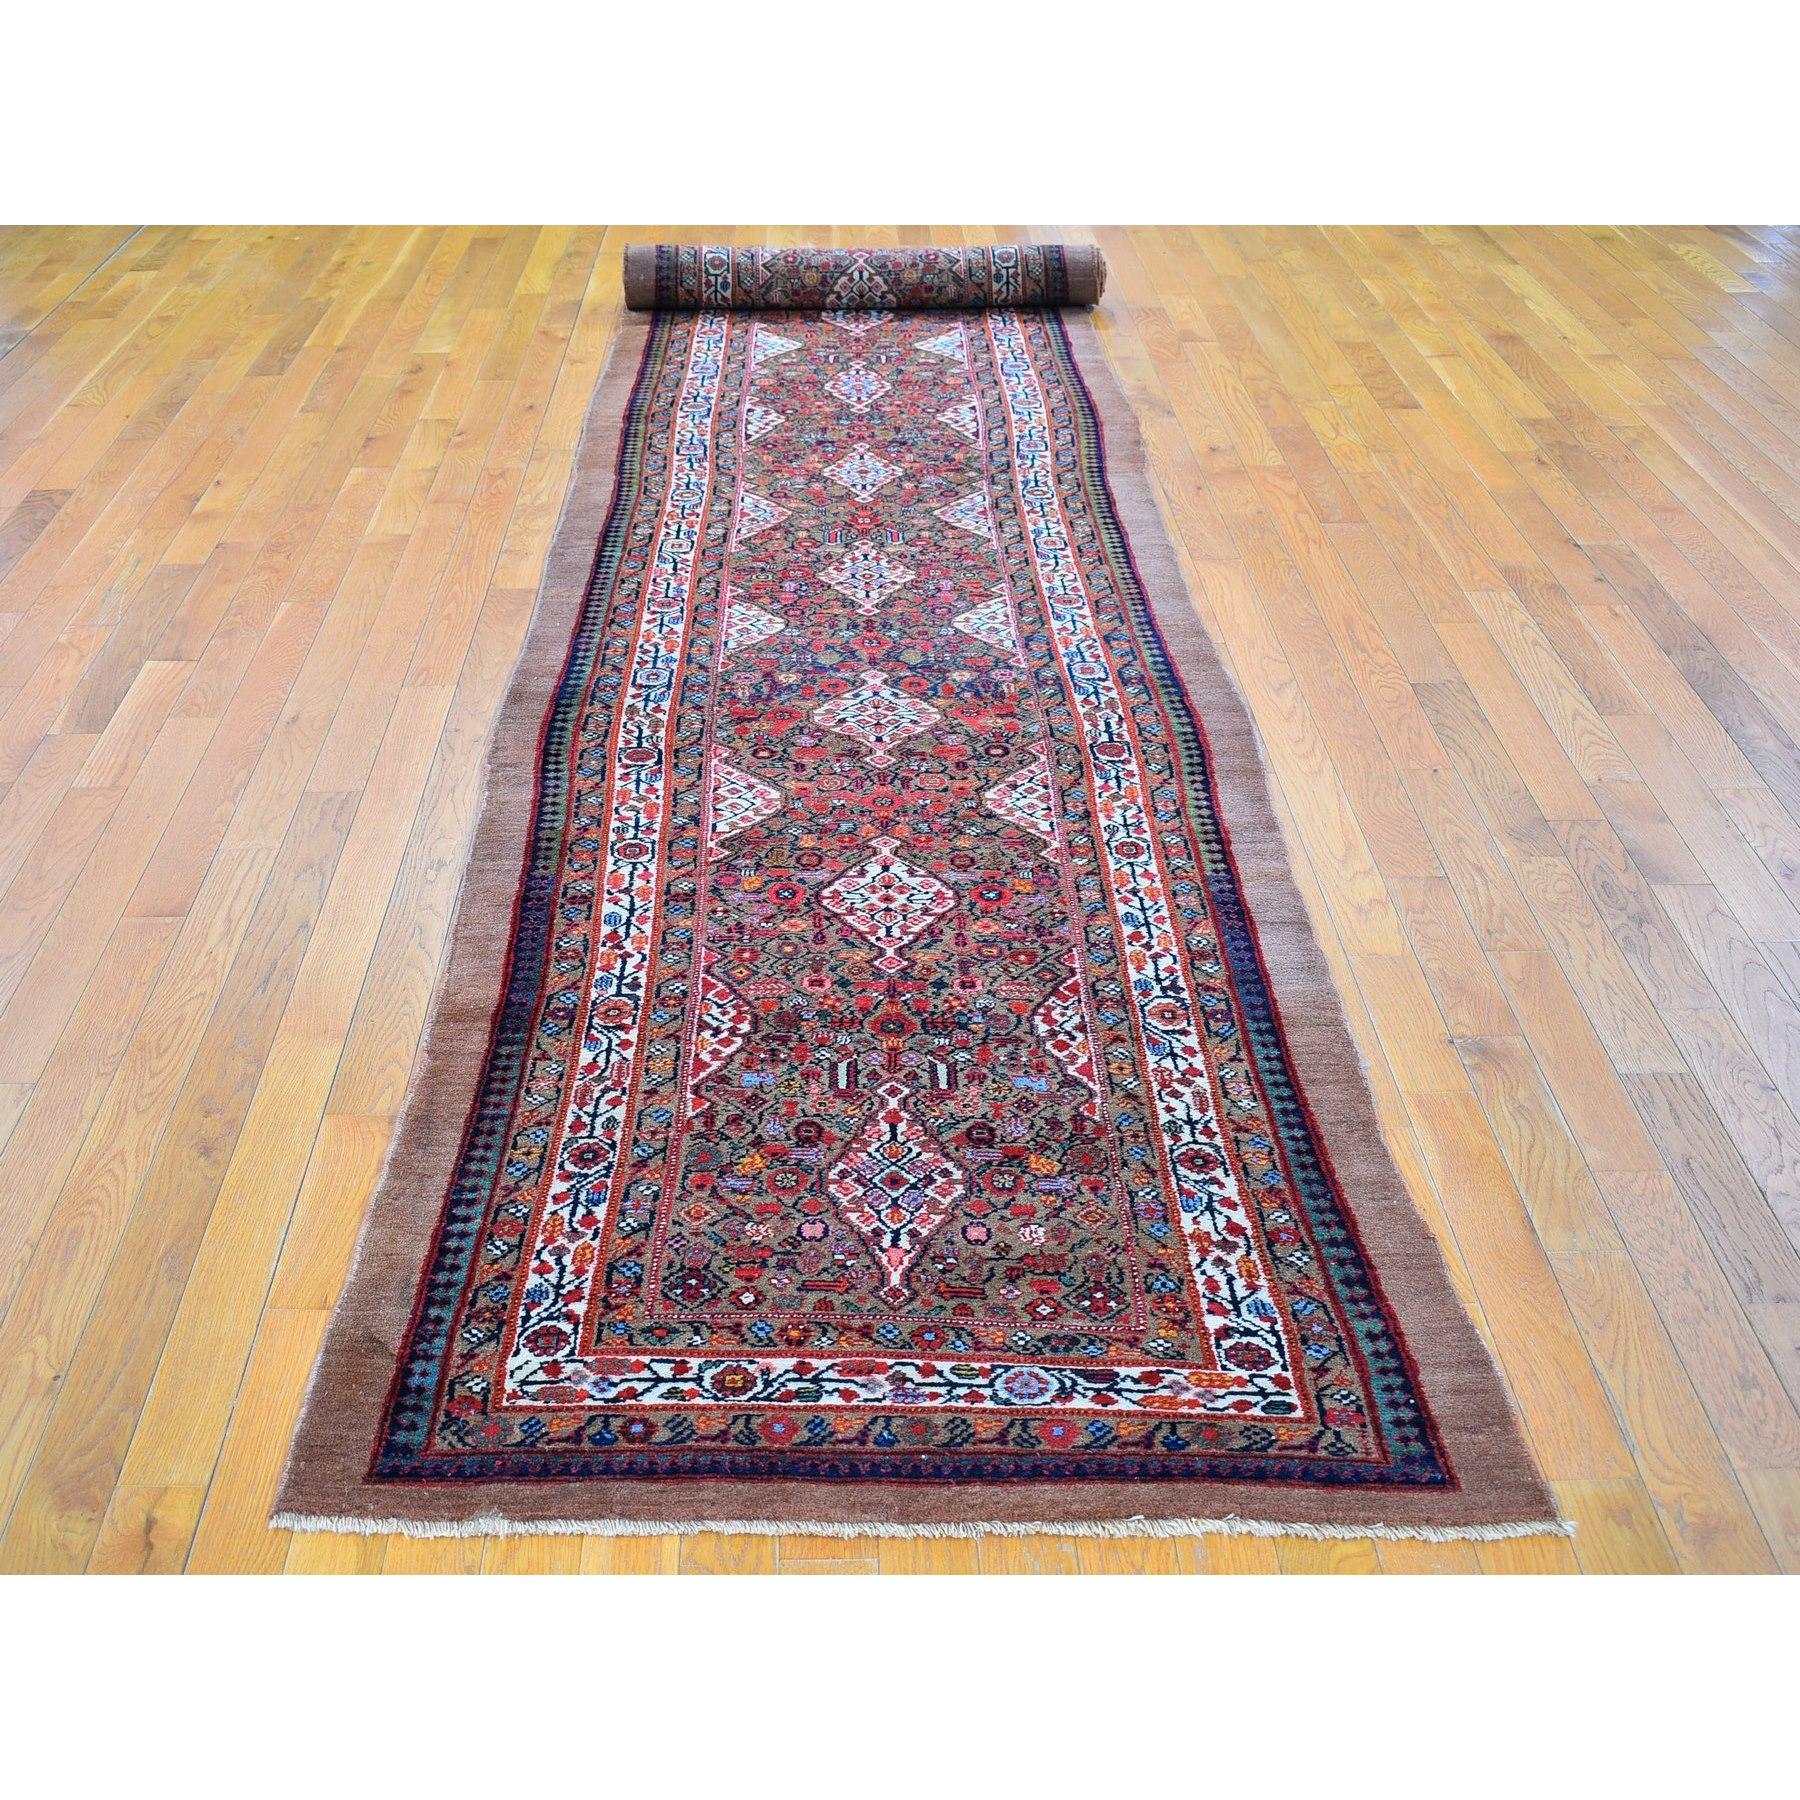 This fabulous hand-knotted carpet has been created and designed for extra strength and durability. This rug has been handcrafted for weeks in the traditional method that is used to make
Exact Rug Size in Feet and Inches : 3'6